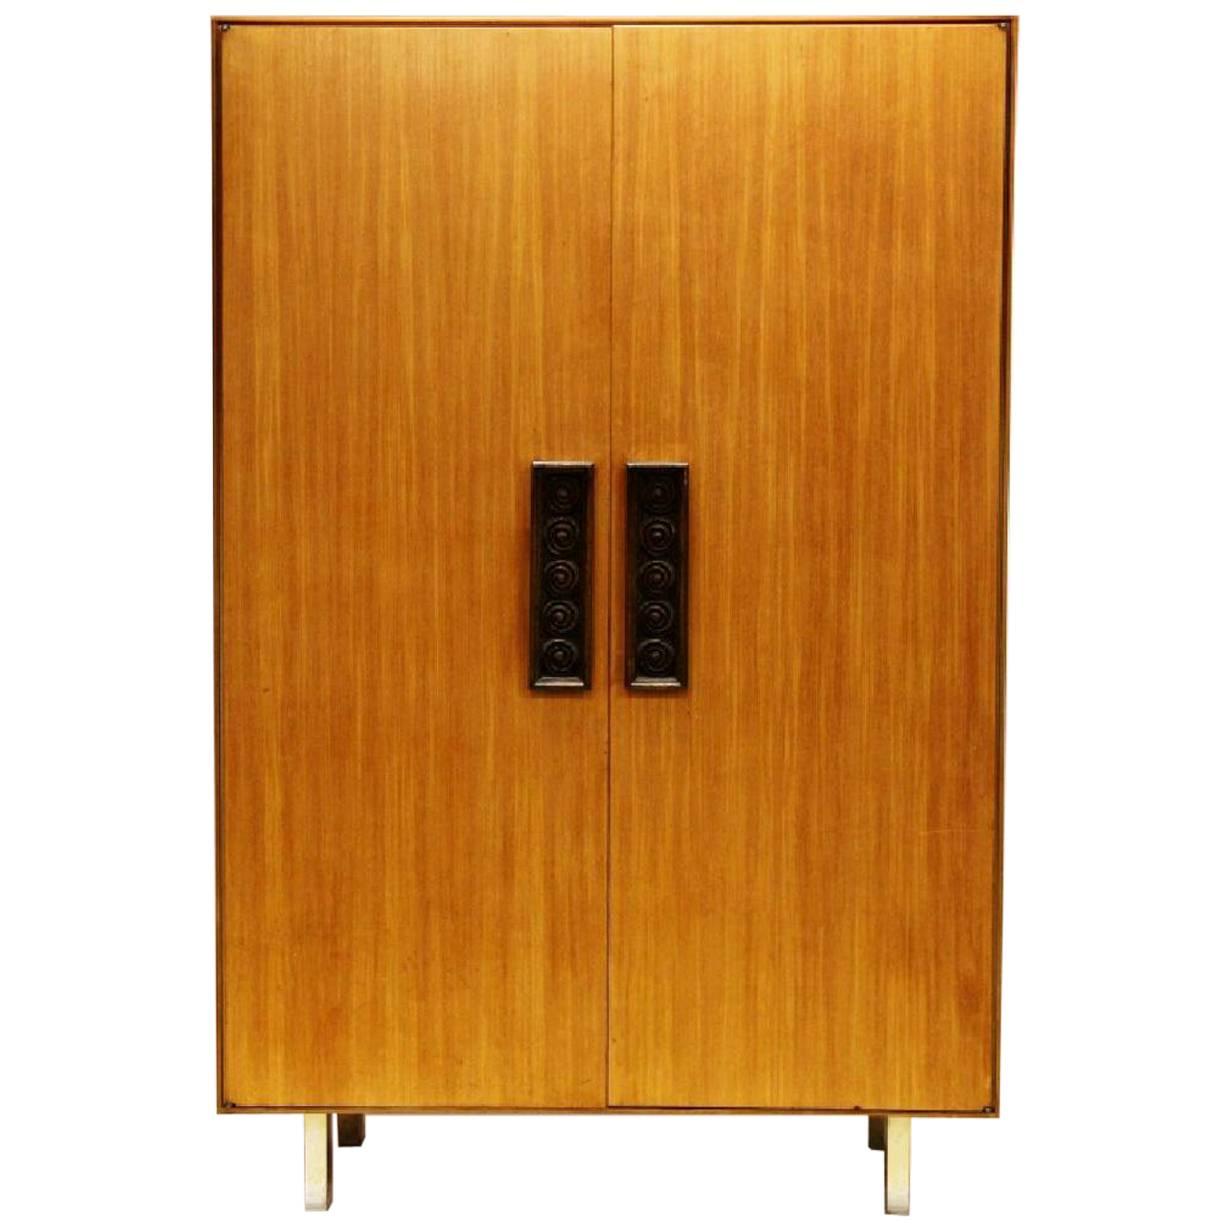 Early and Rare Armoire by Vladimir Kagan